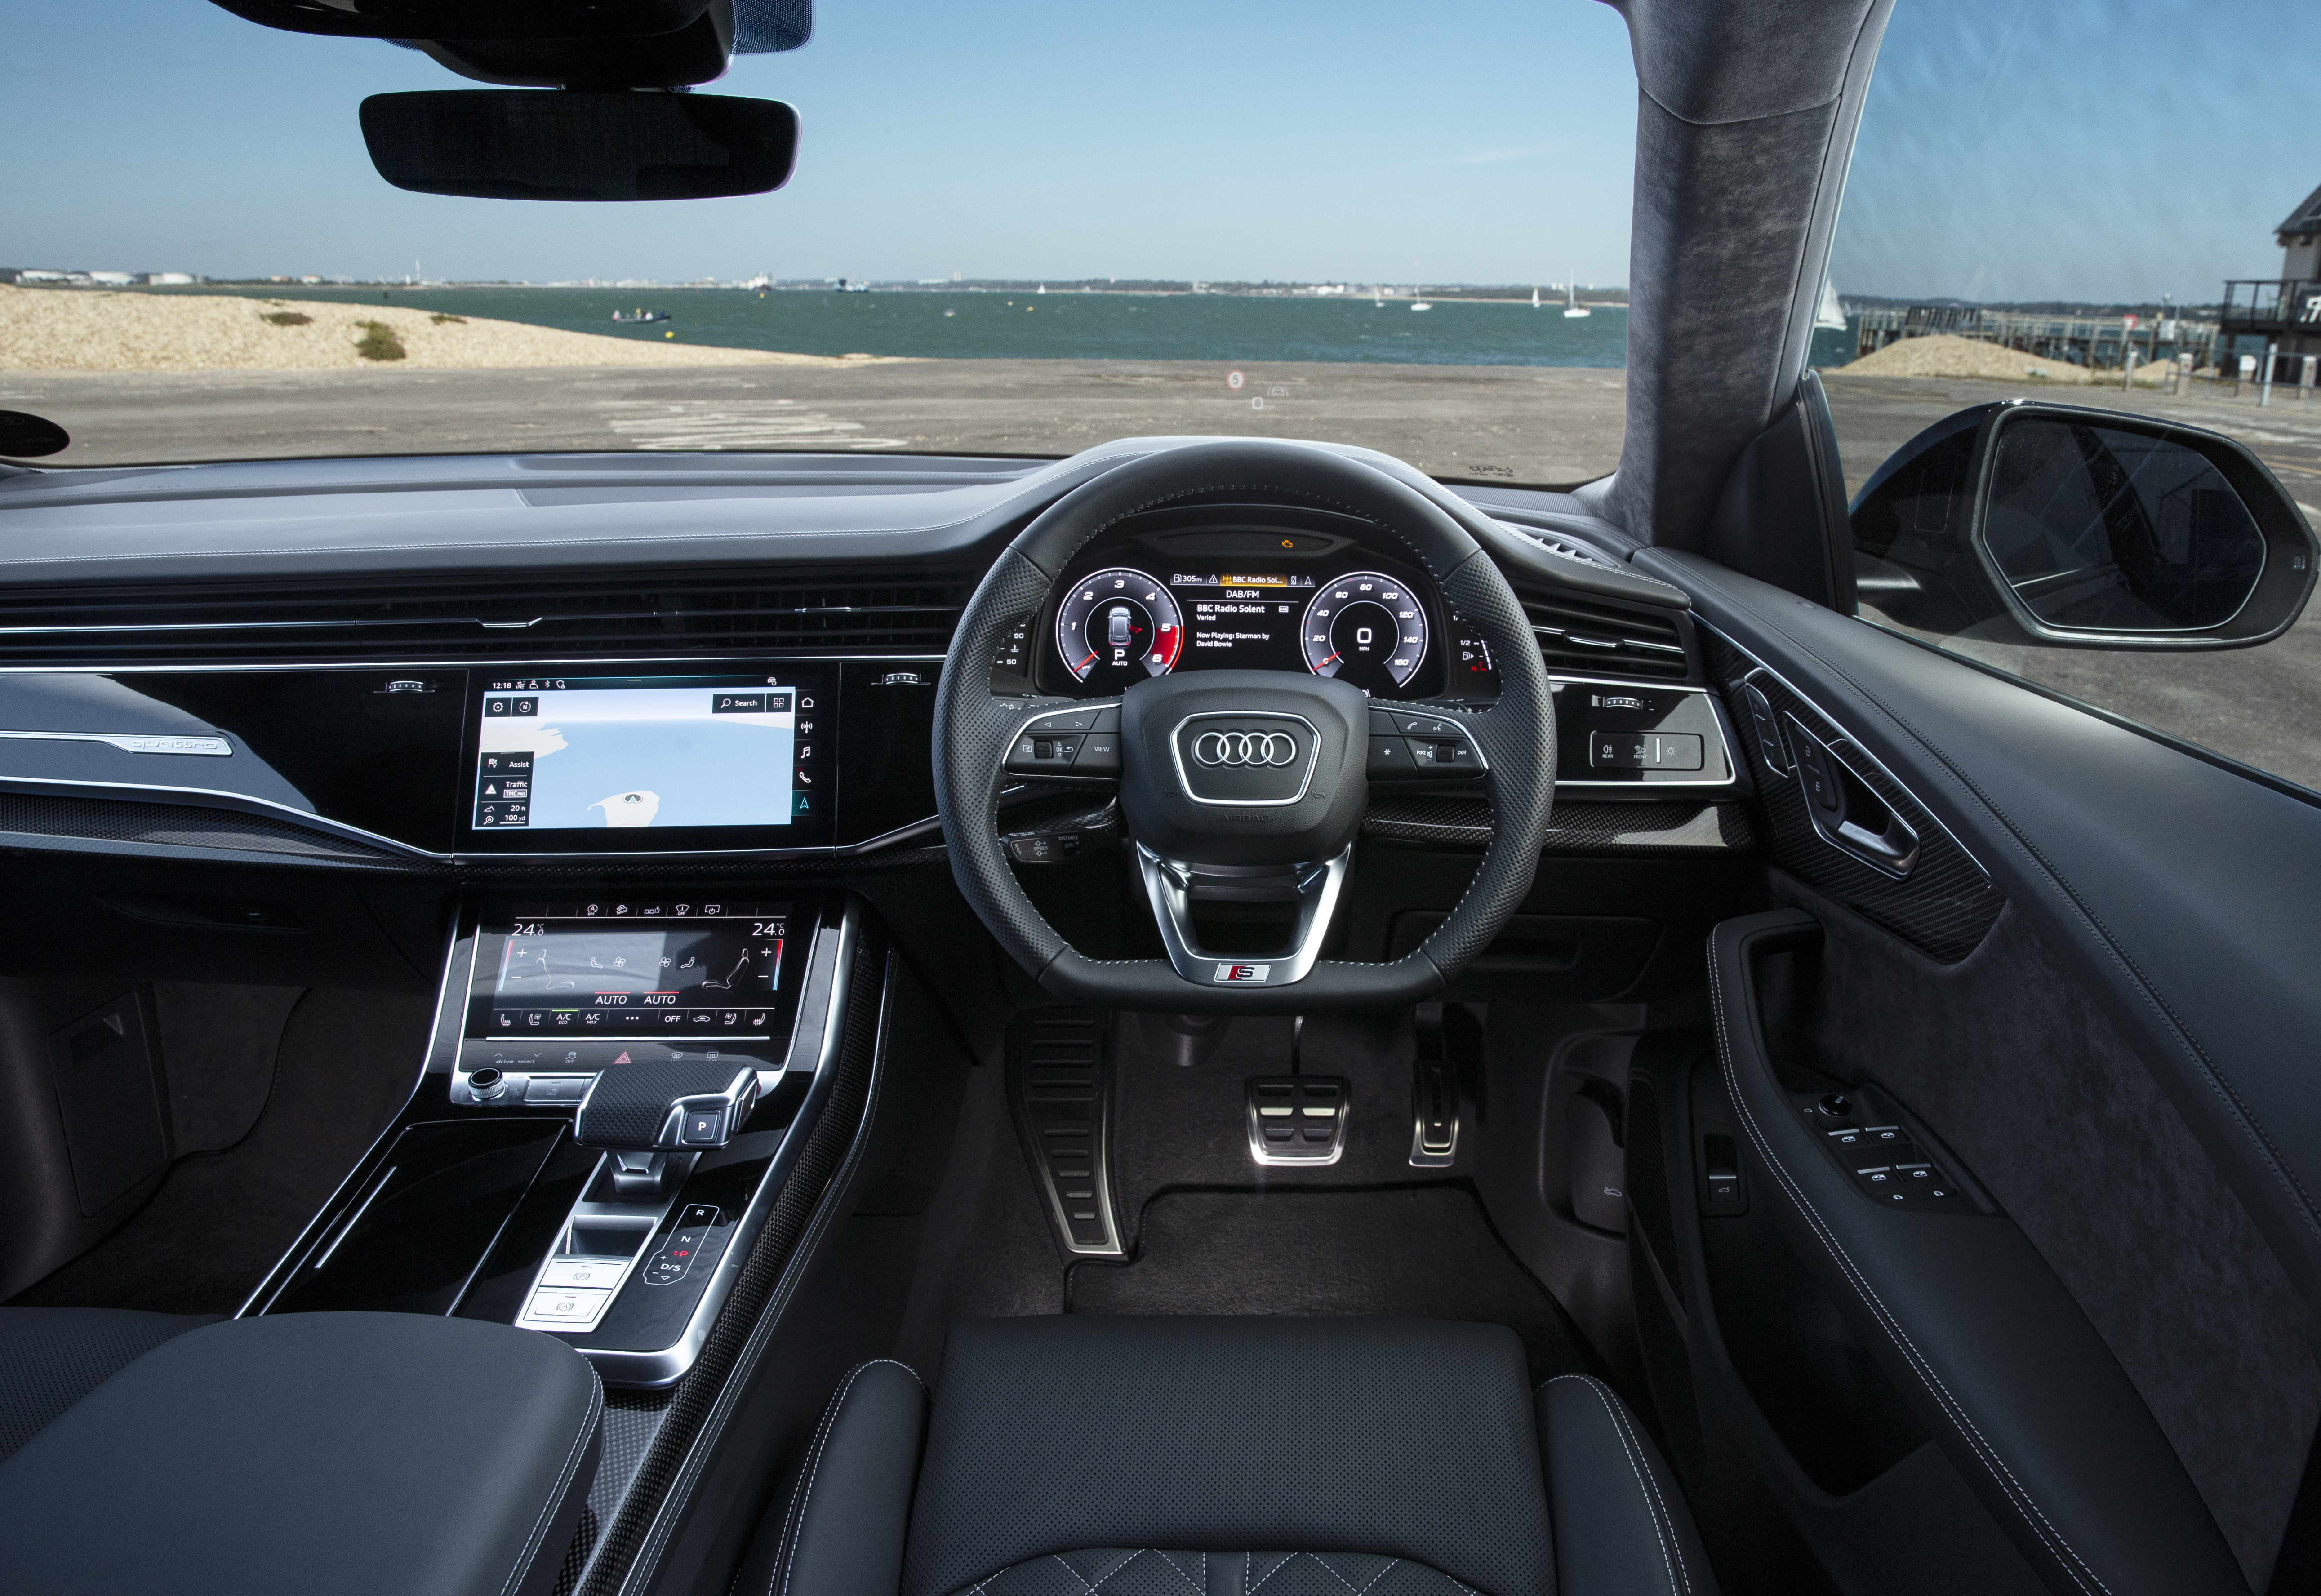 The interior is dominated by a twin screen infotainment system